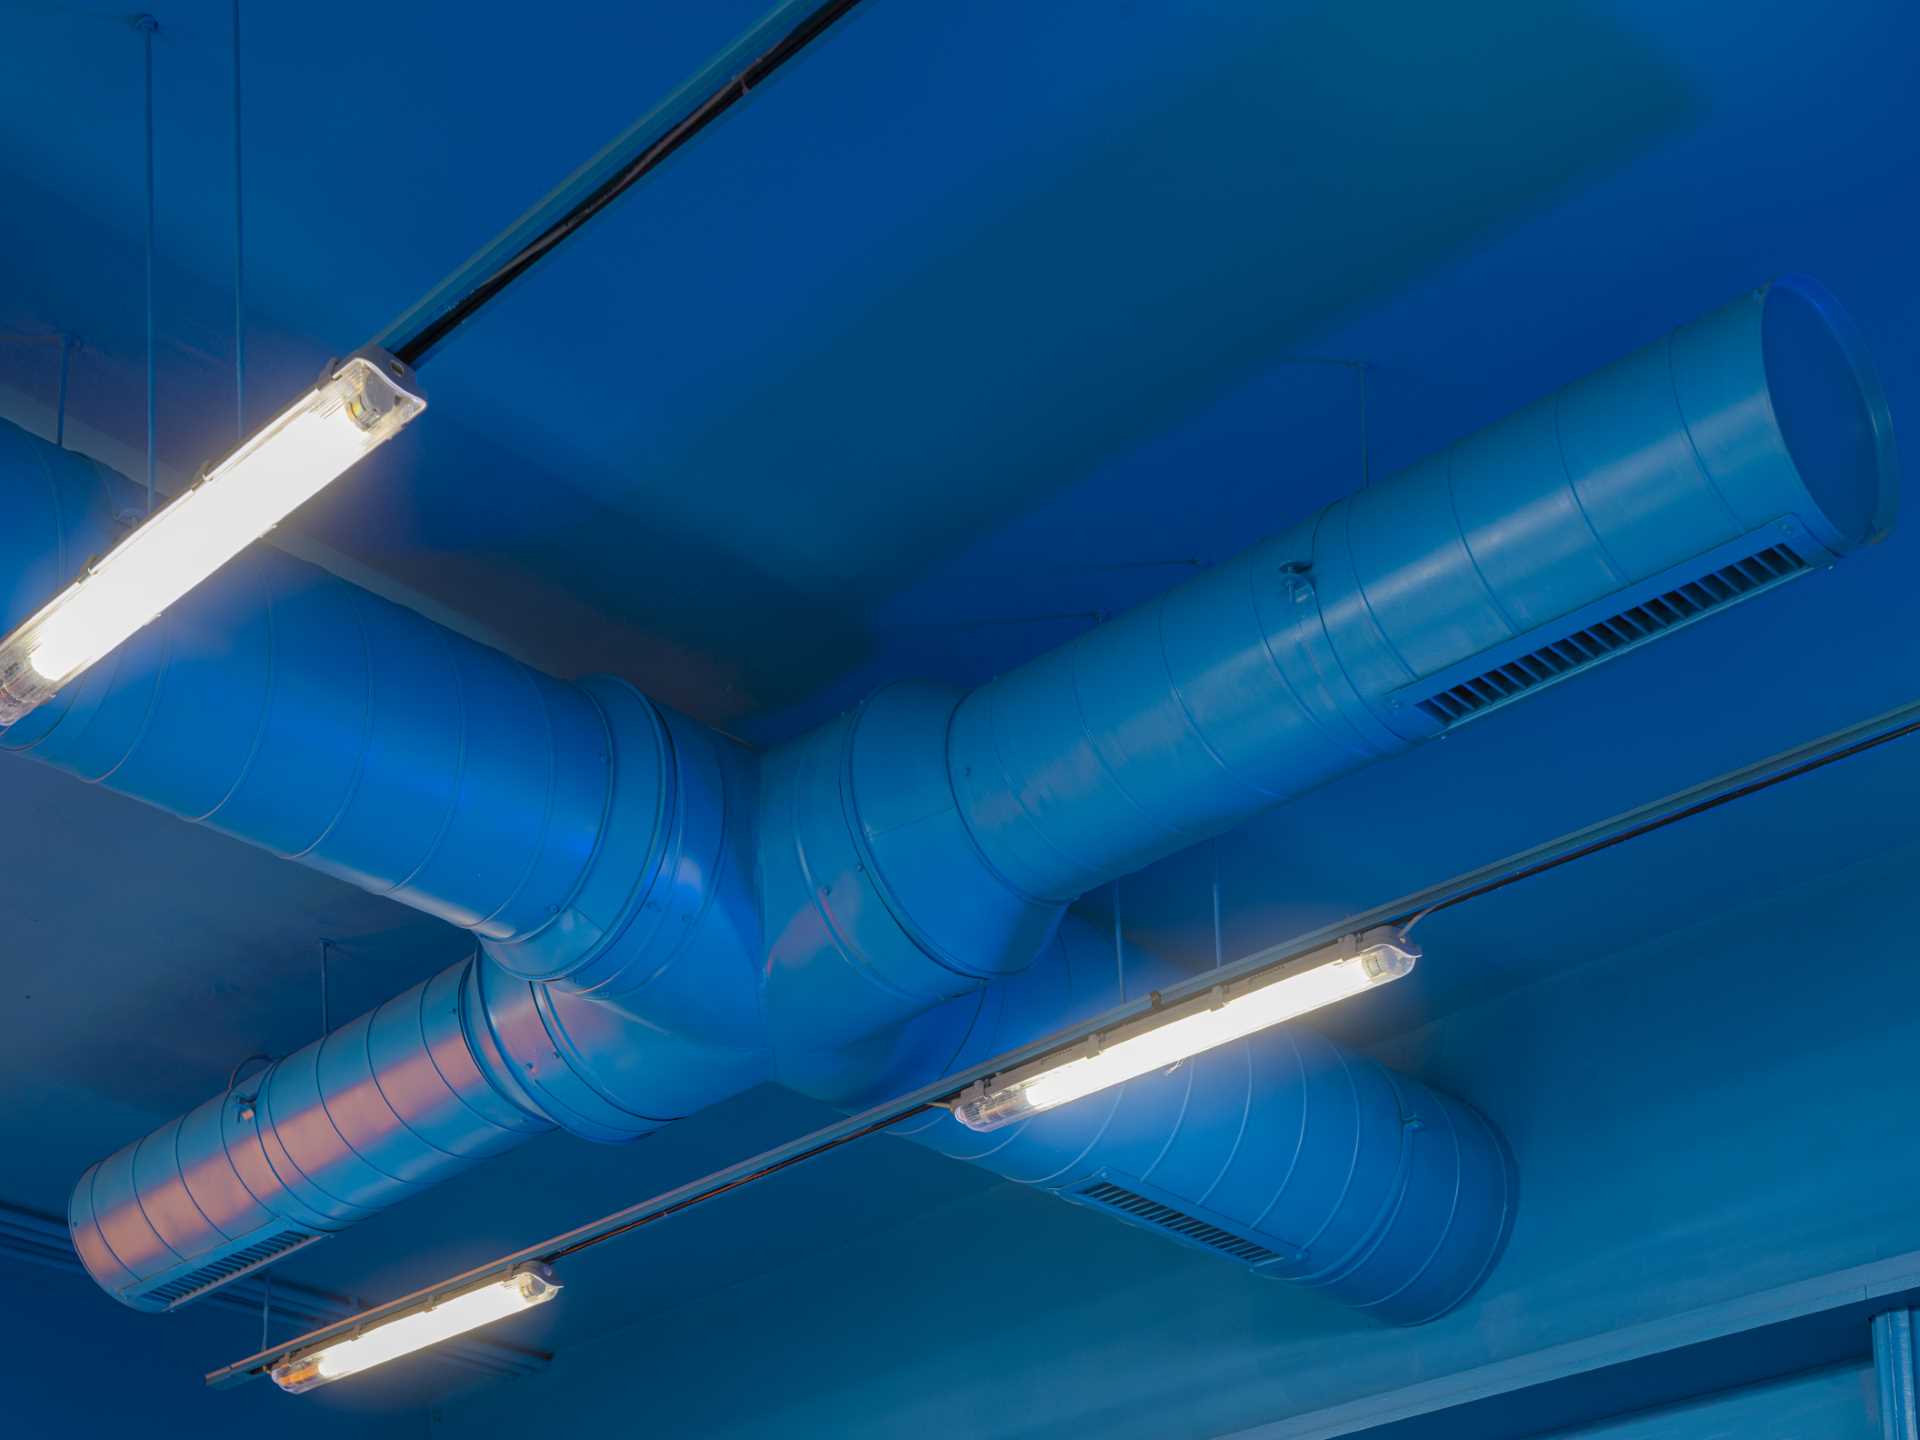 The ceiling of this modern ice cream shop has also been painted in the same blue, allowing the ducting and light tracks to somewhat blend into the background.